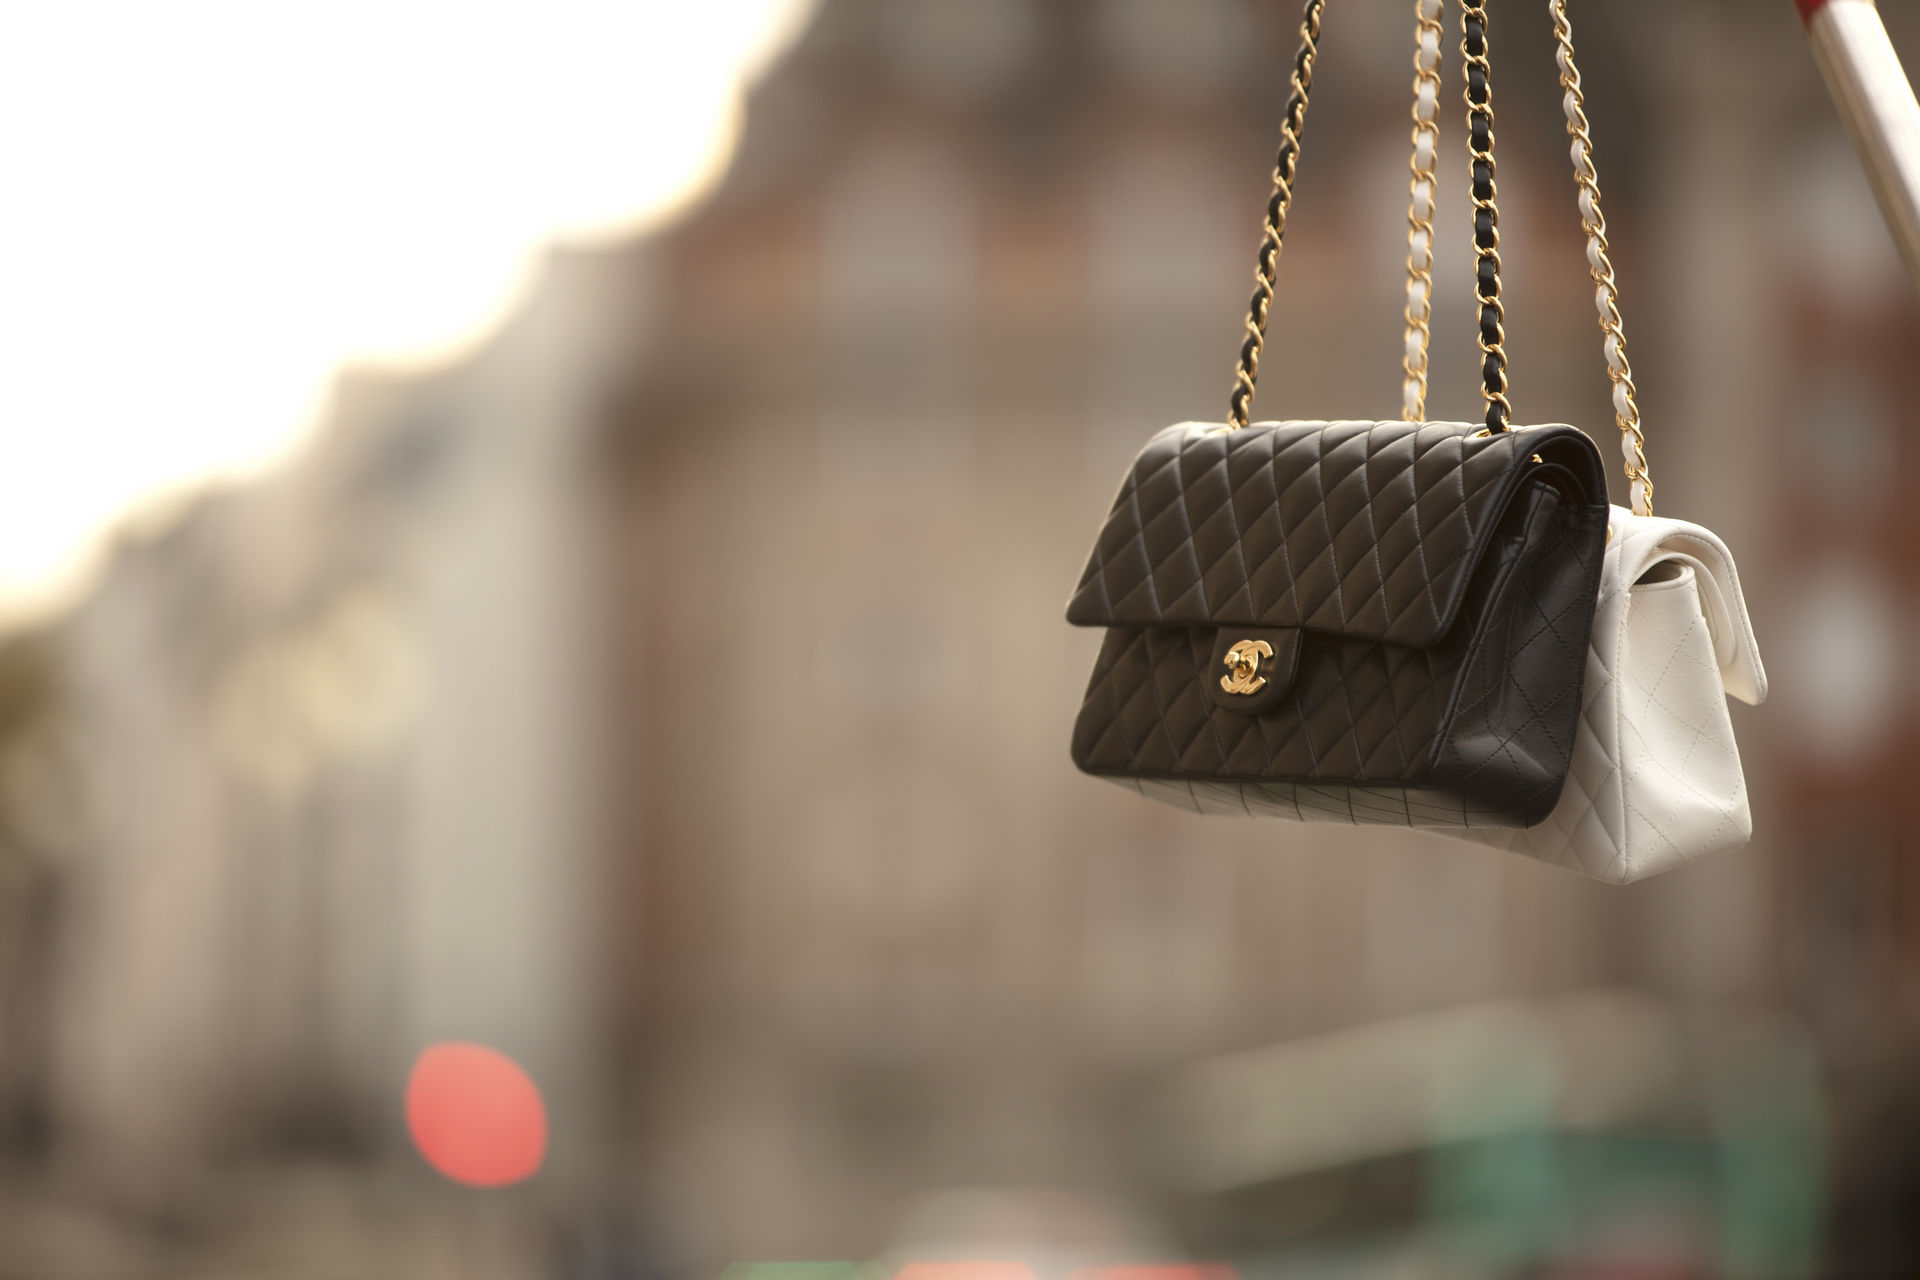 The 11.12 bag, as seen in the Chanel Iconic film by Sofia Coppola